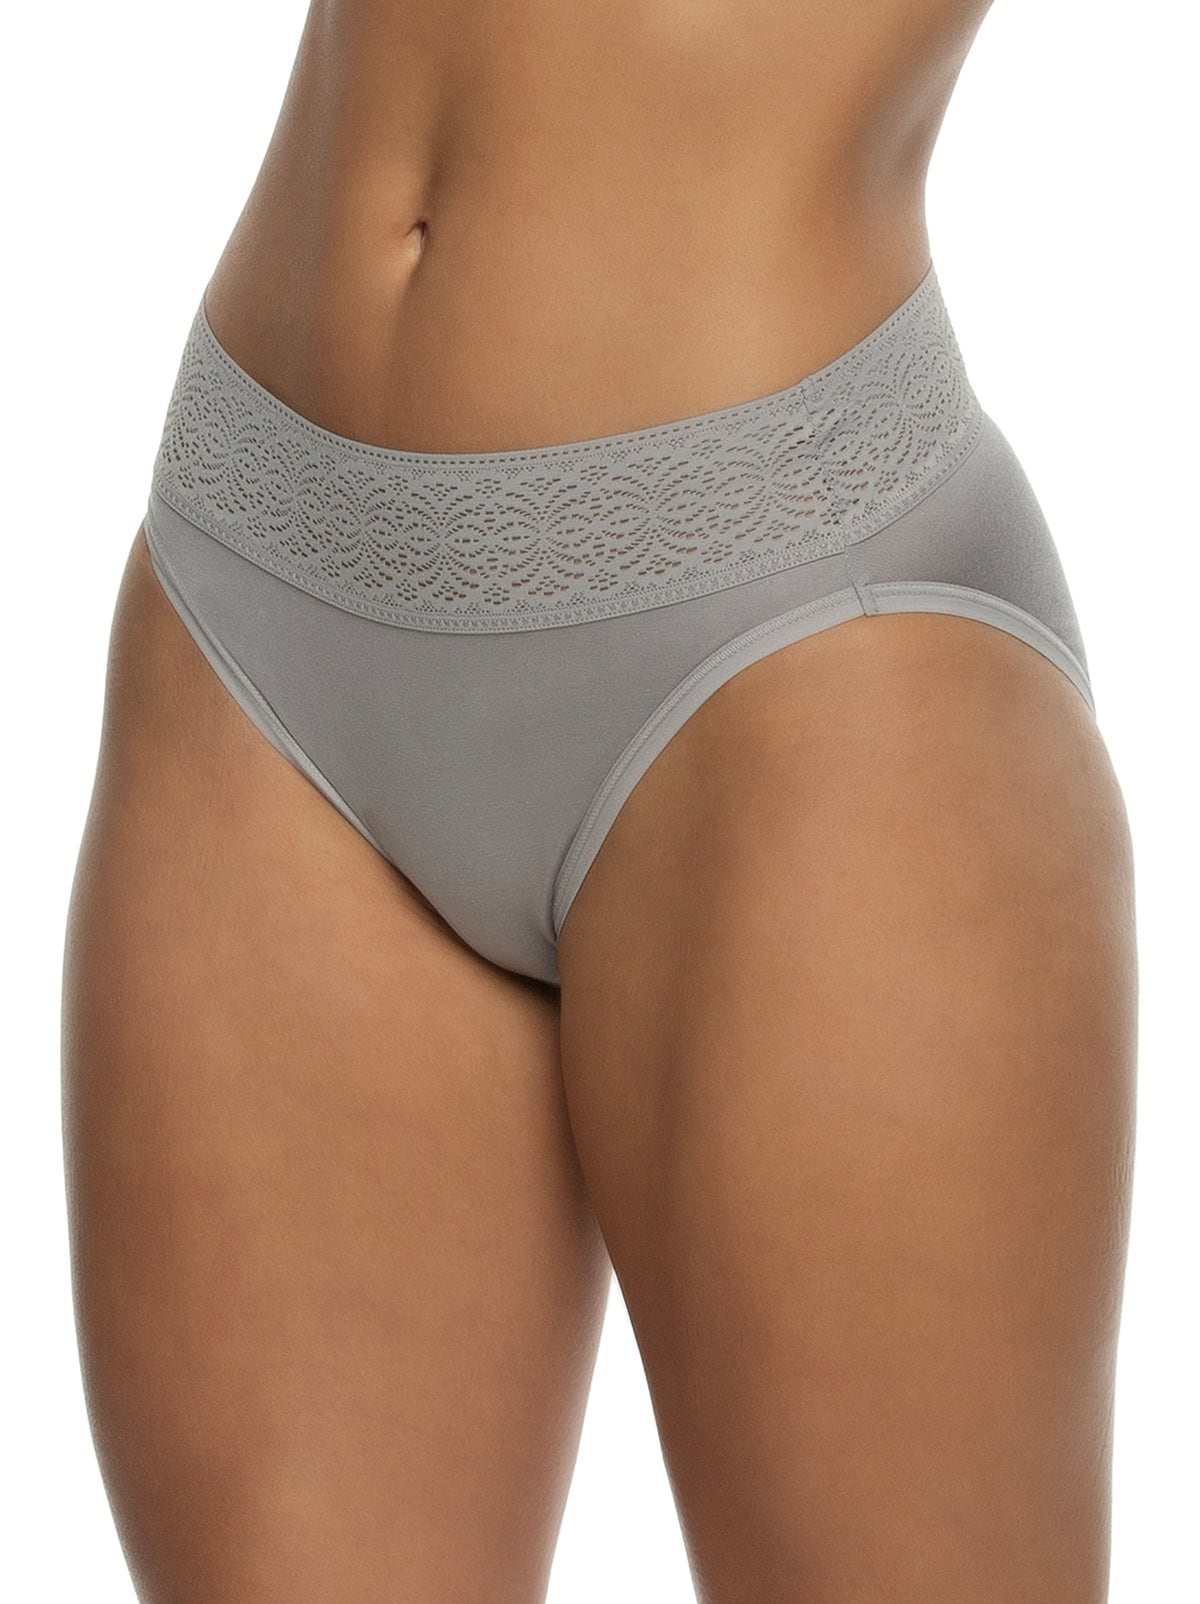 Up To 44% Off on Strapless Panties (2-, or 4-Pk.)